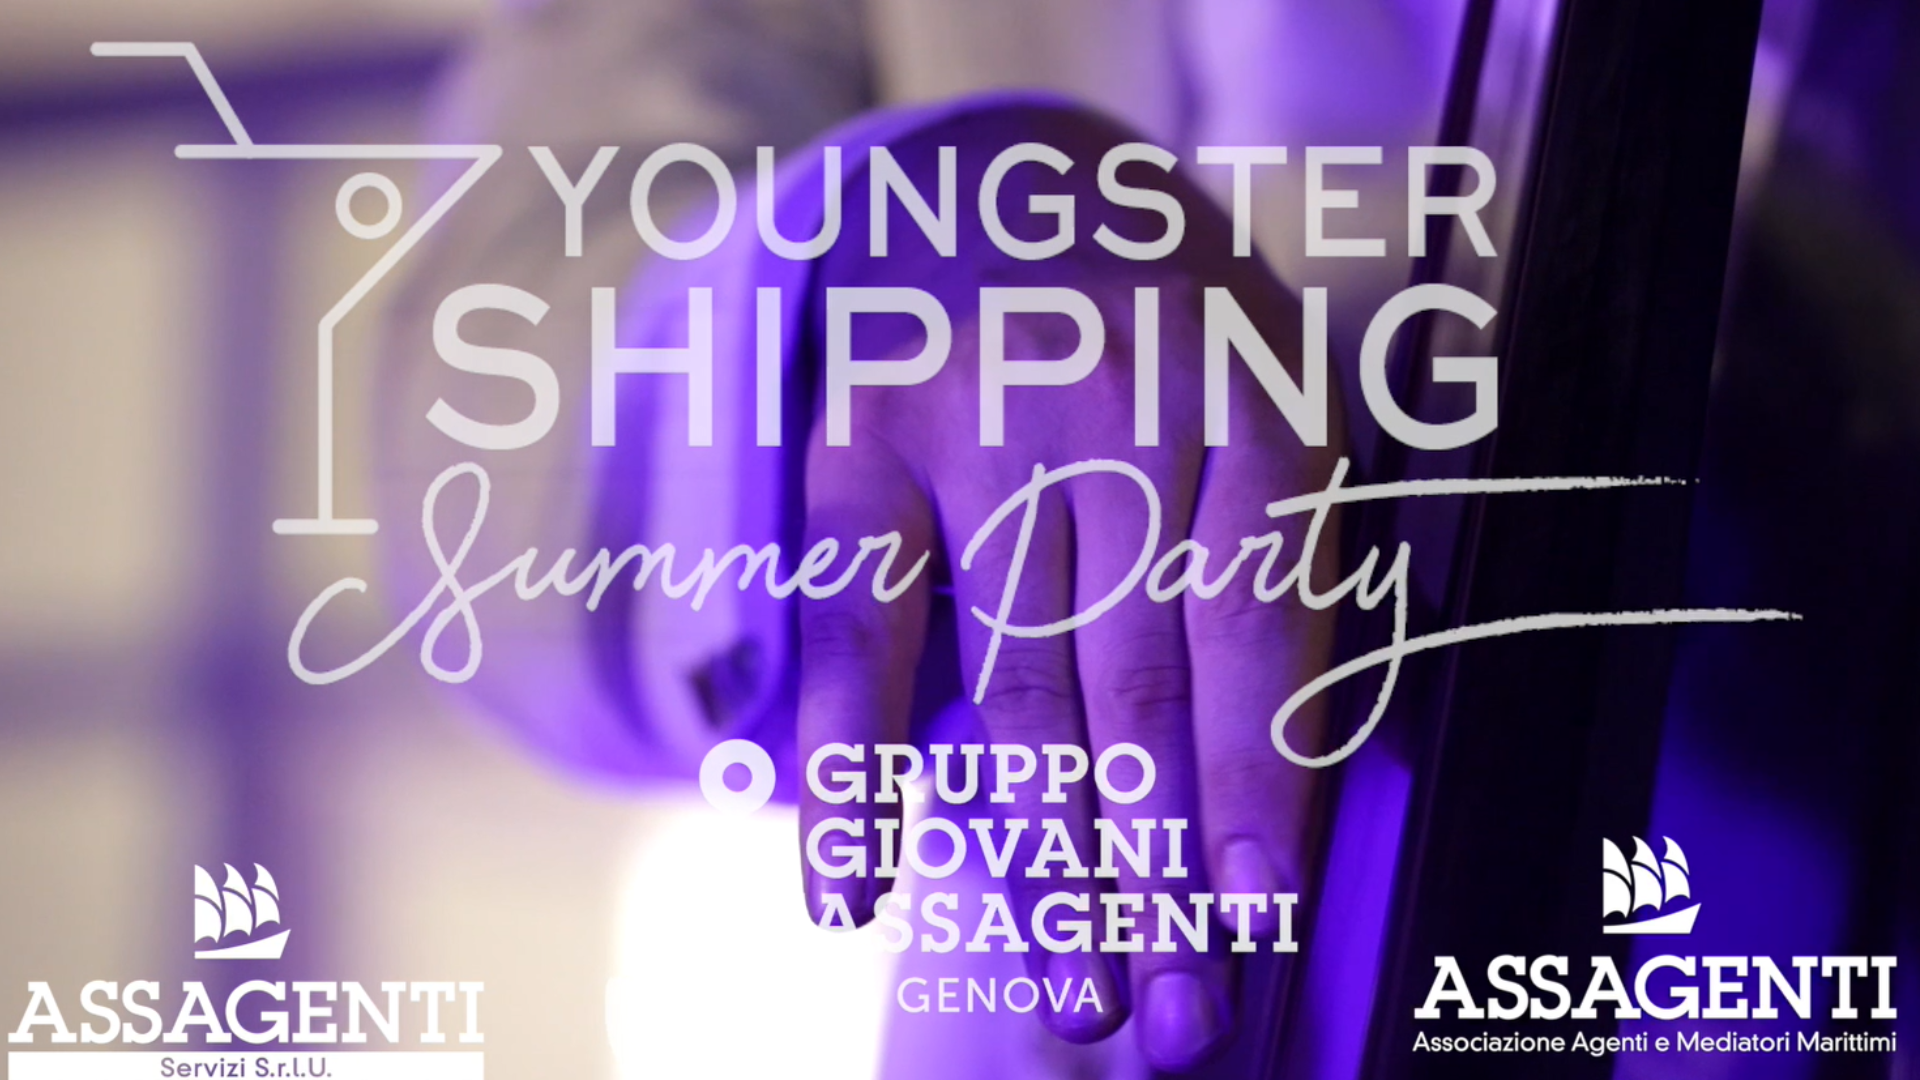 Youngster Shipping Summer Party: è online il video dell'evento!